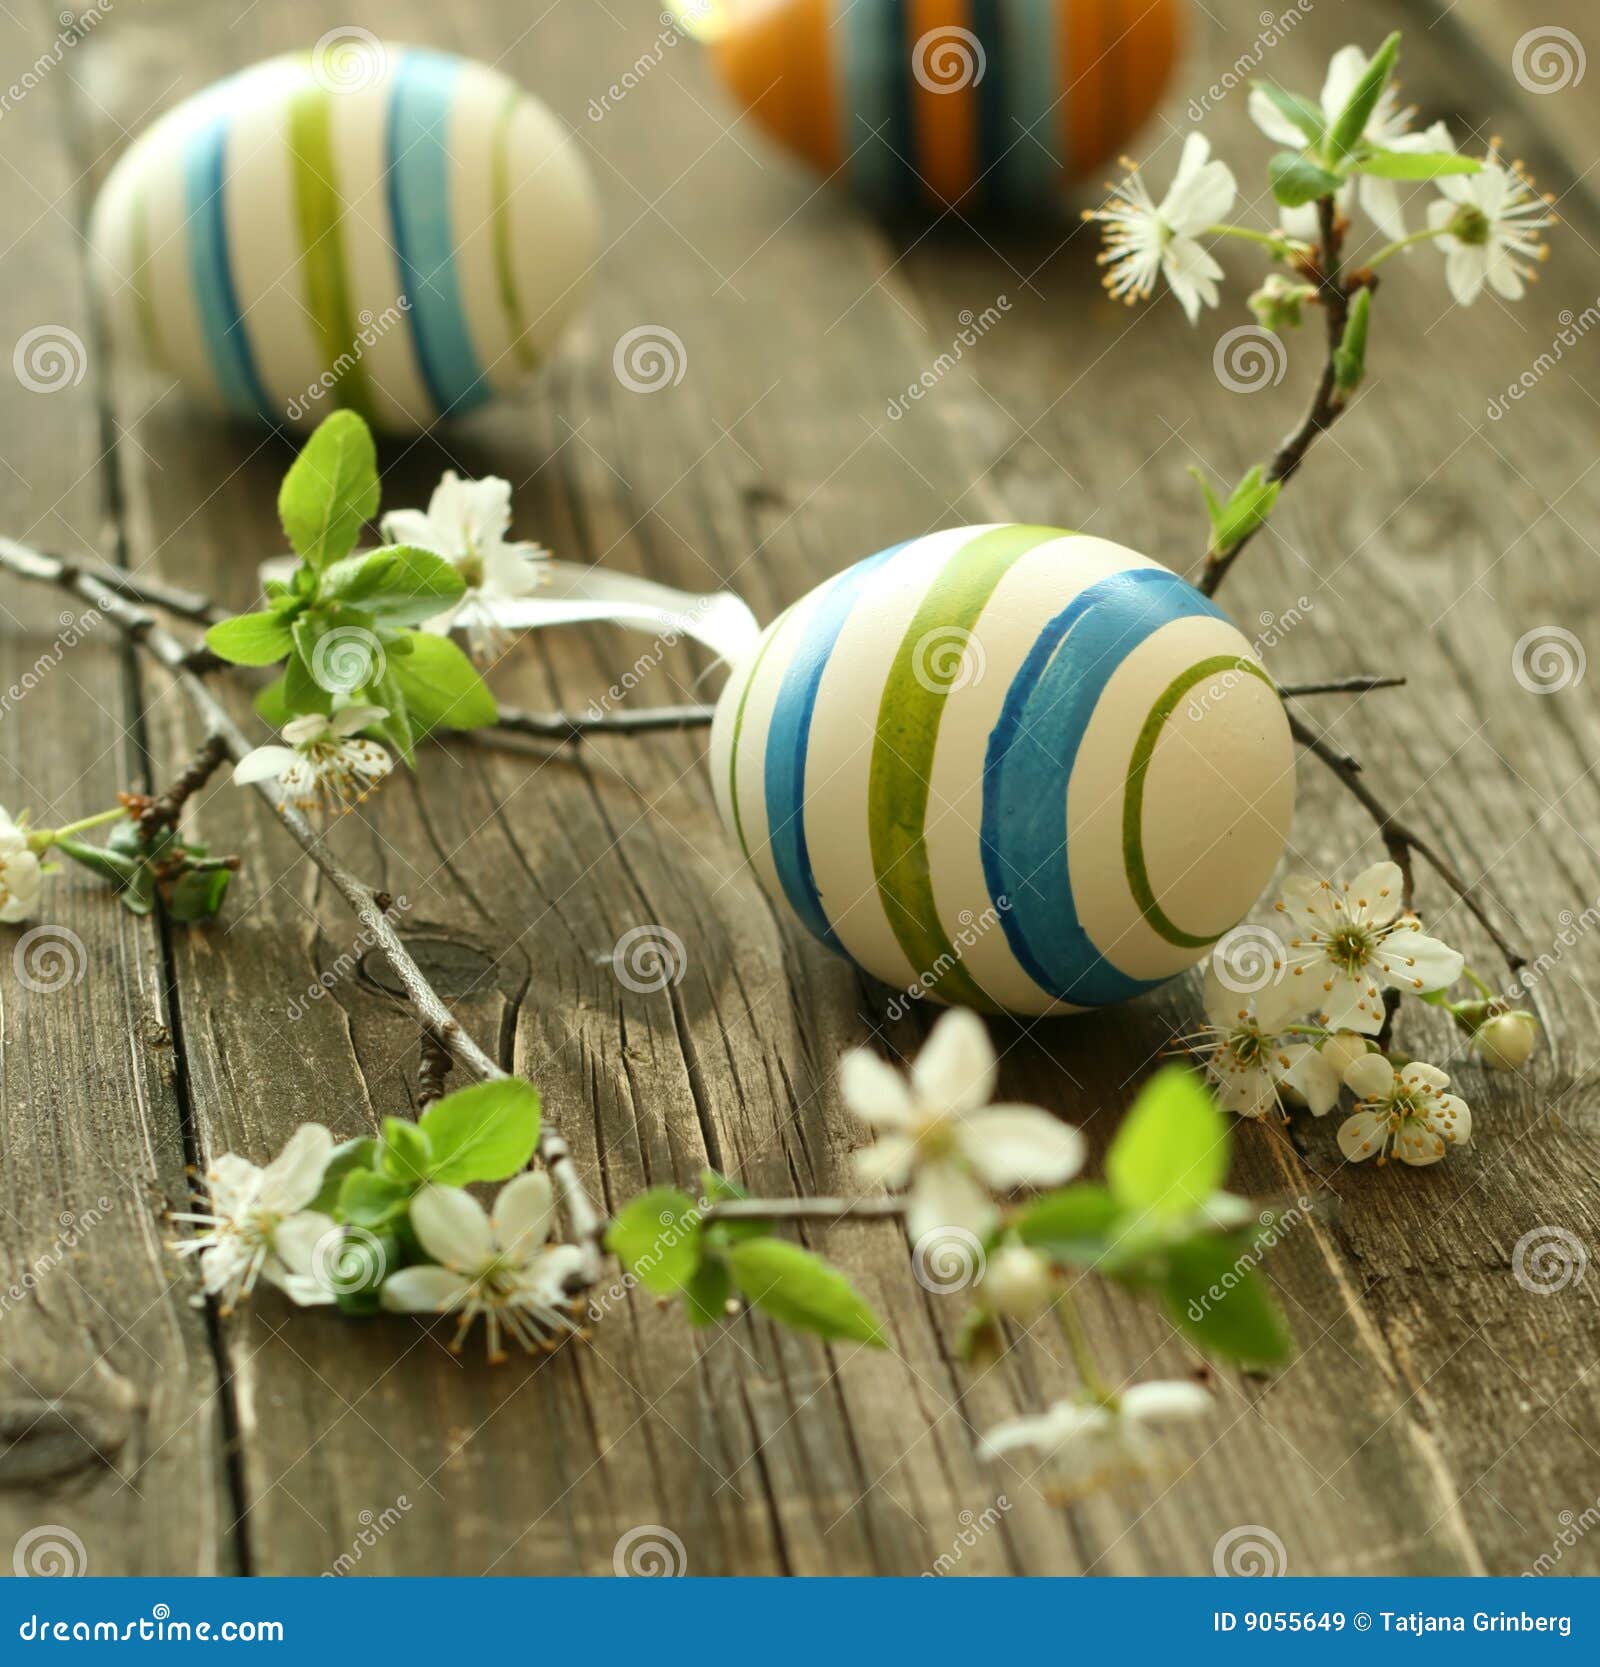  Free Stock Images: Easter eggs and branch with flowers on wooden